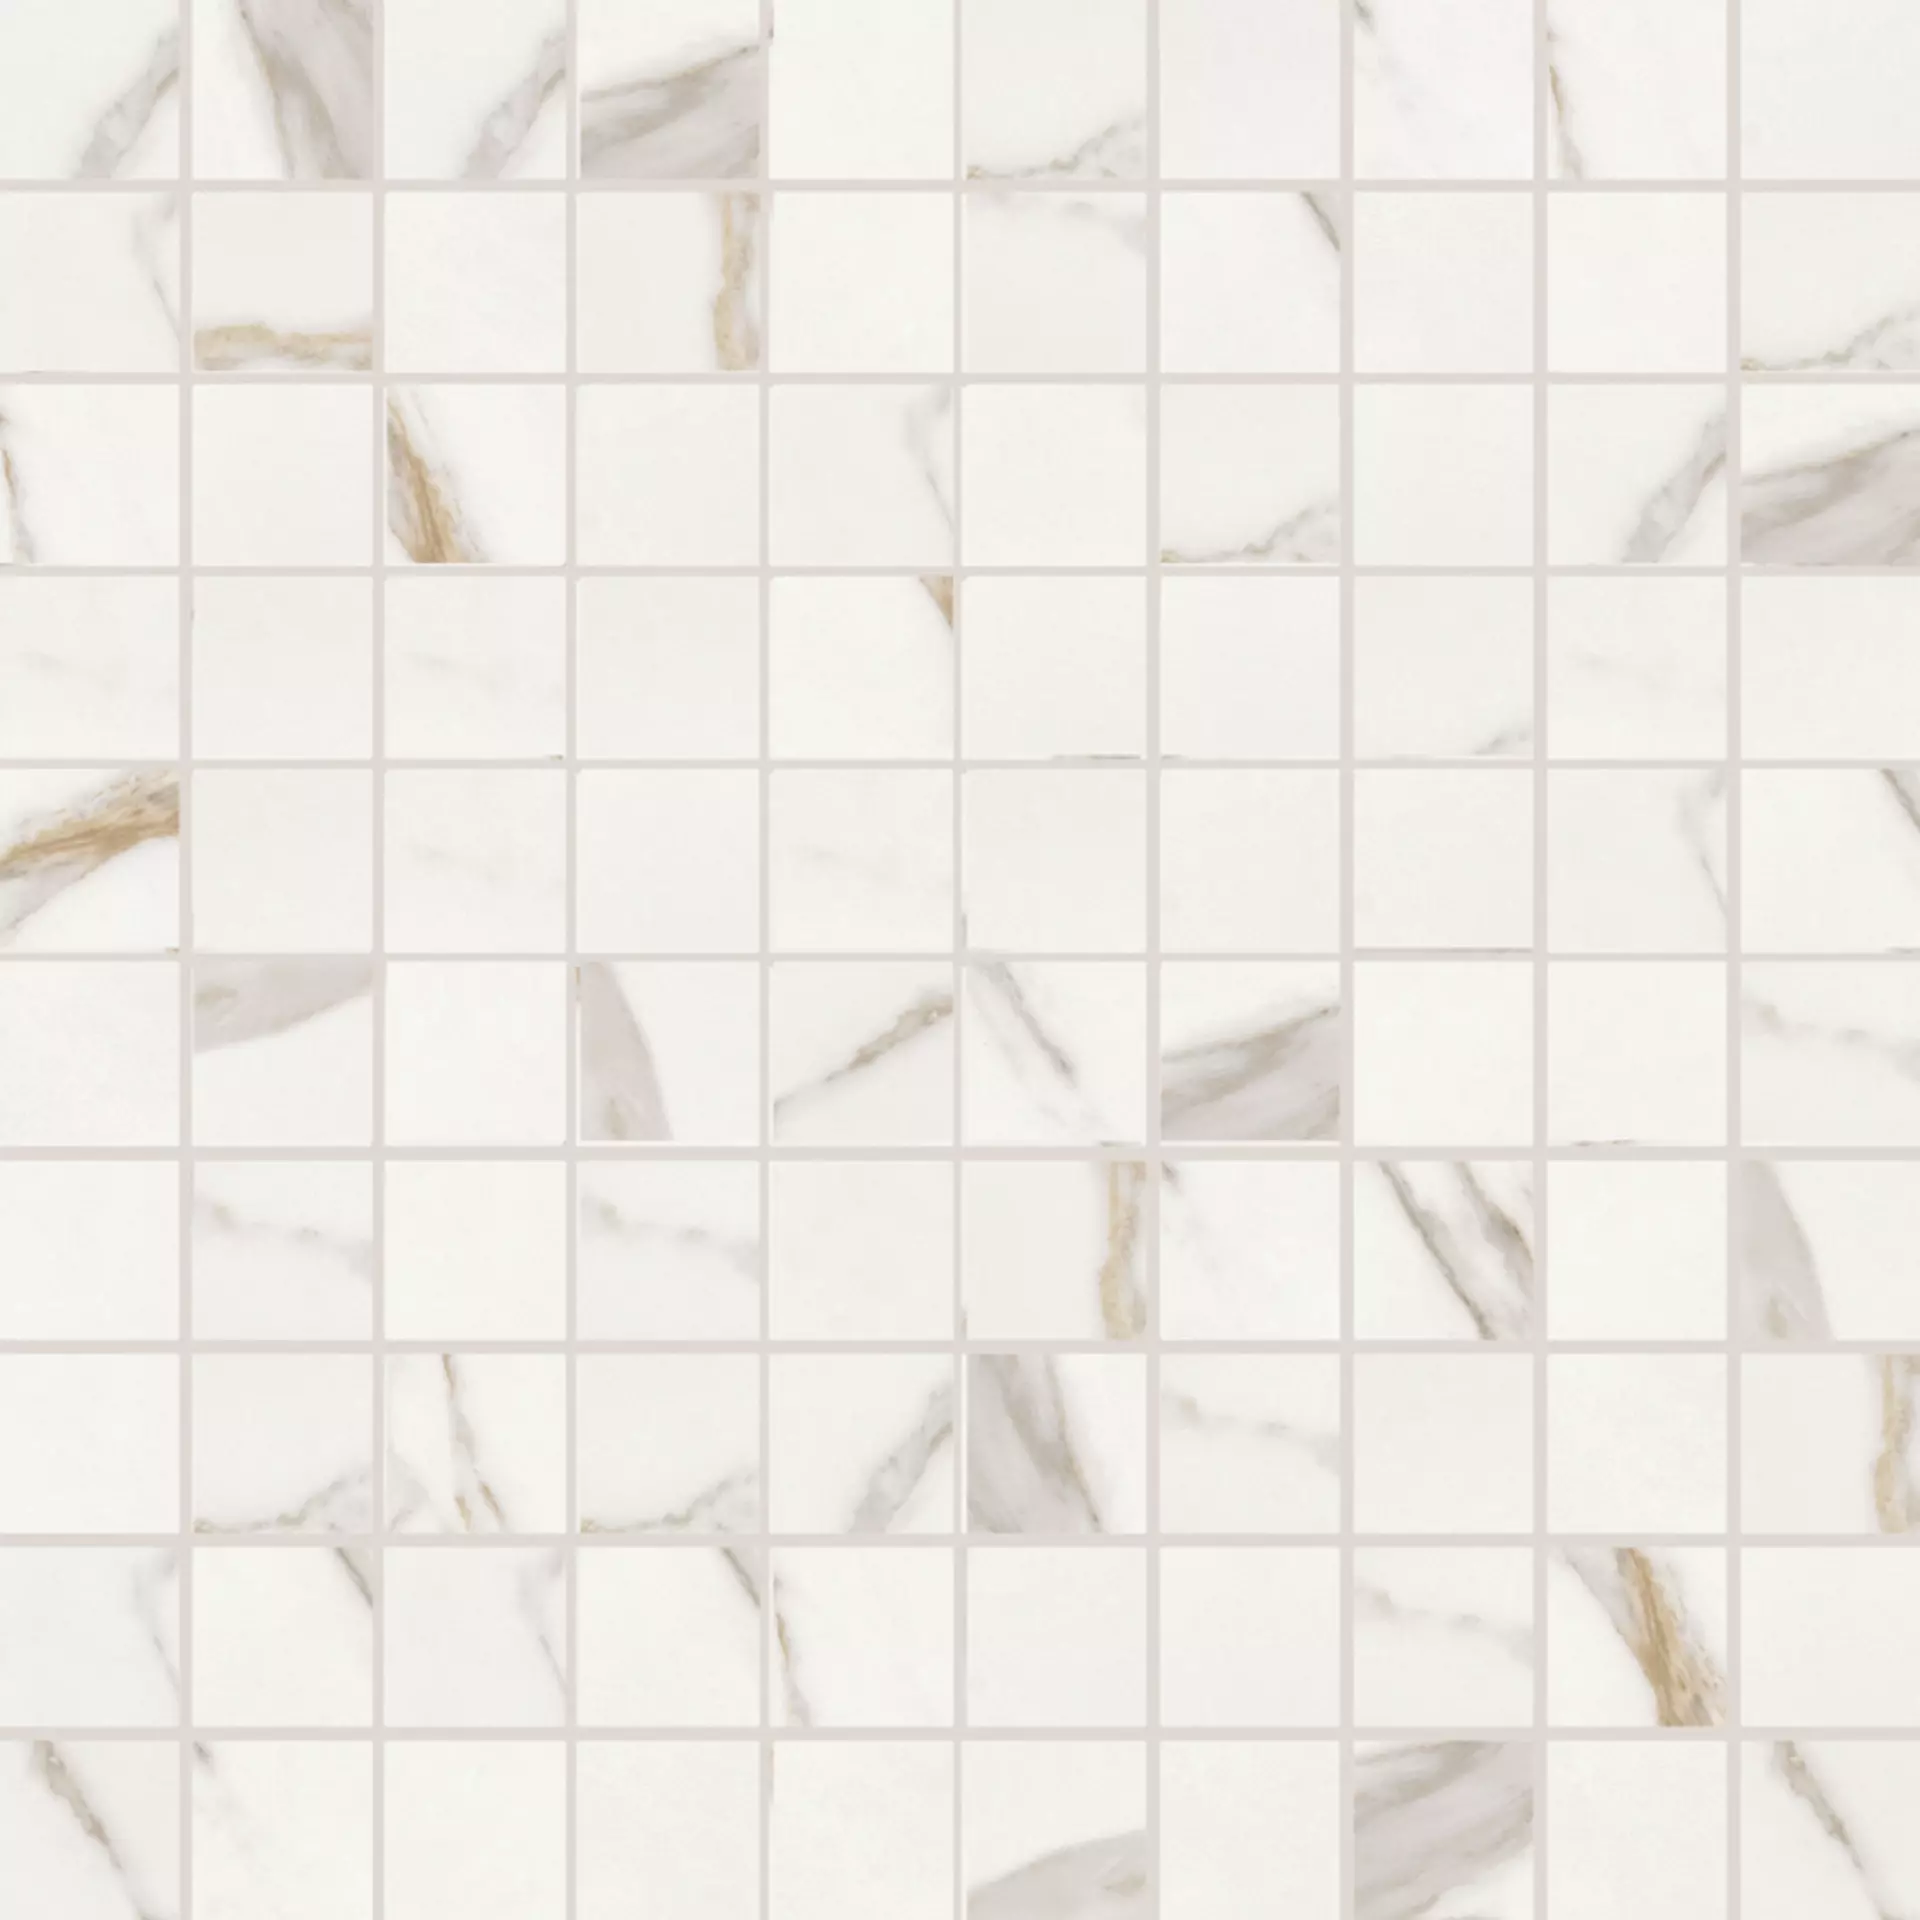 Keope Elements Lux Calacatta Gold Lappato Mosaic 41324D38 30x30cm rectified 9mm